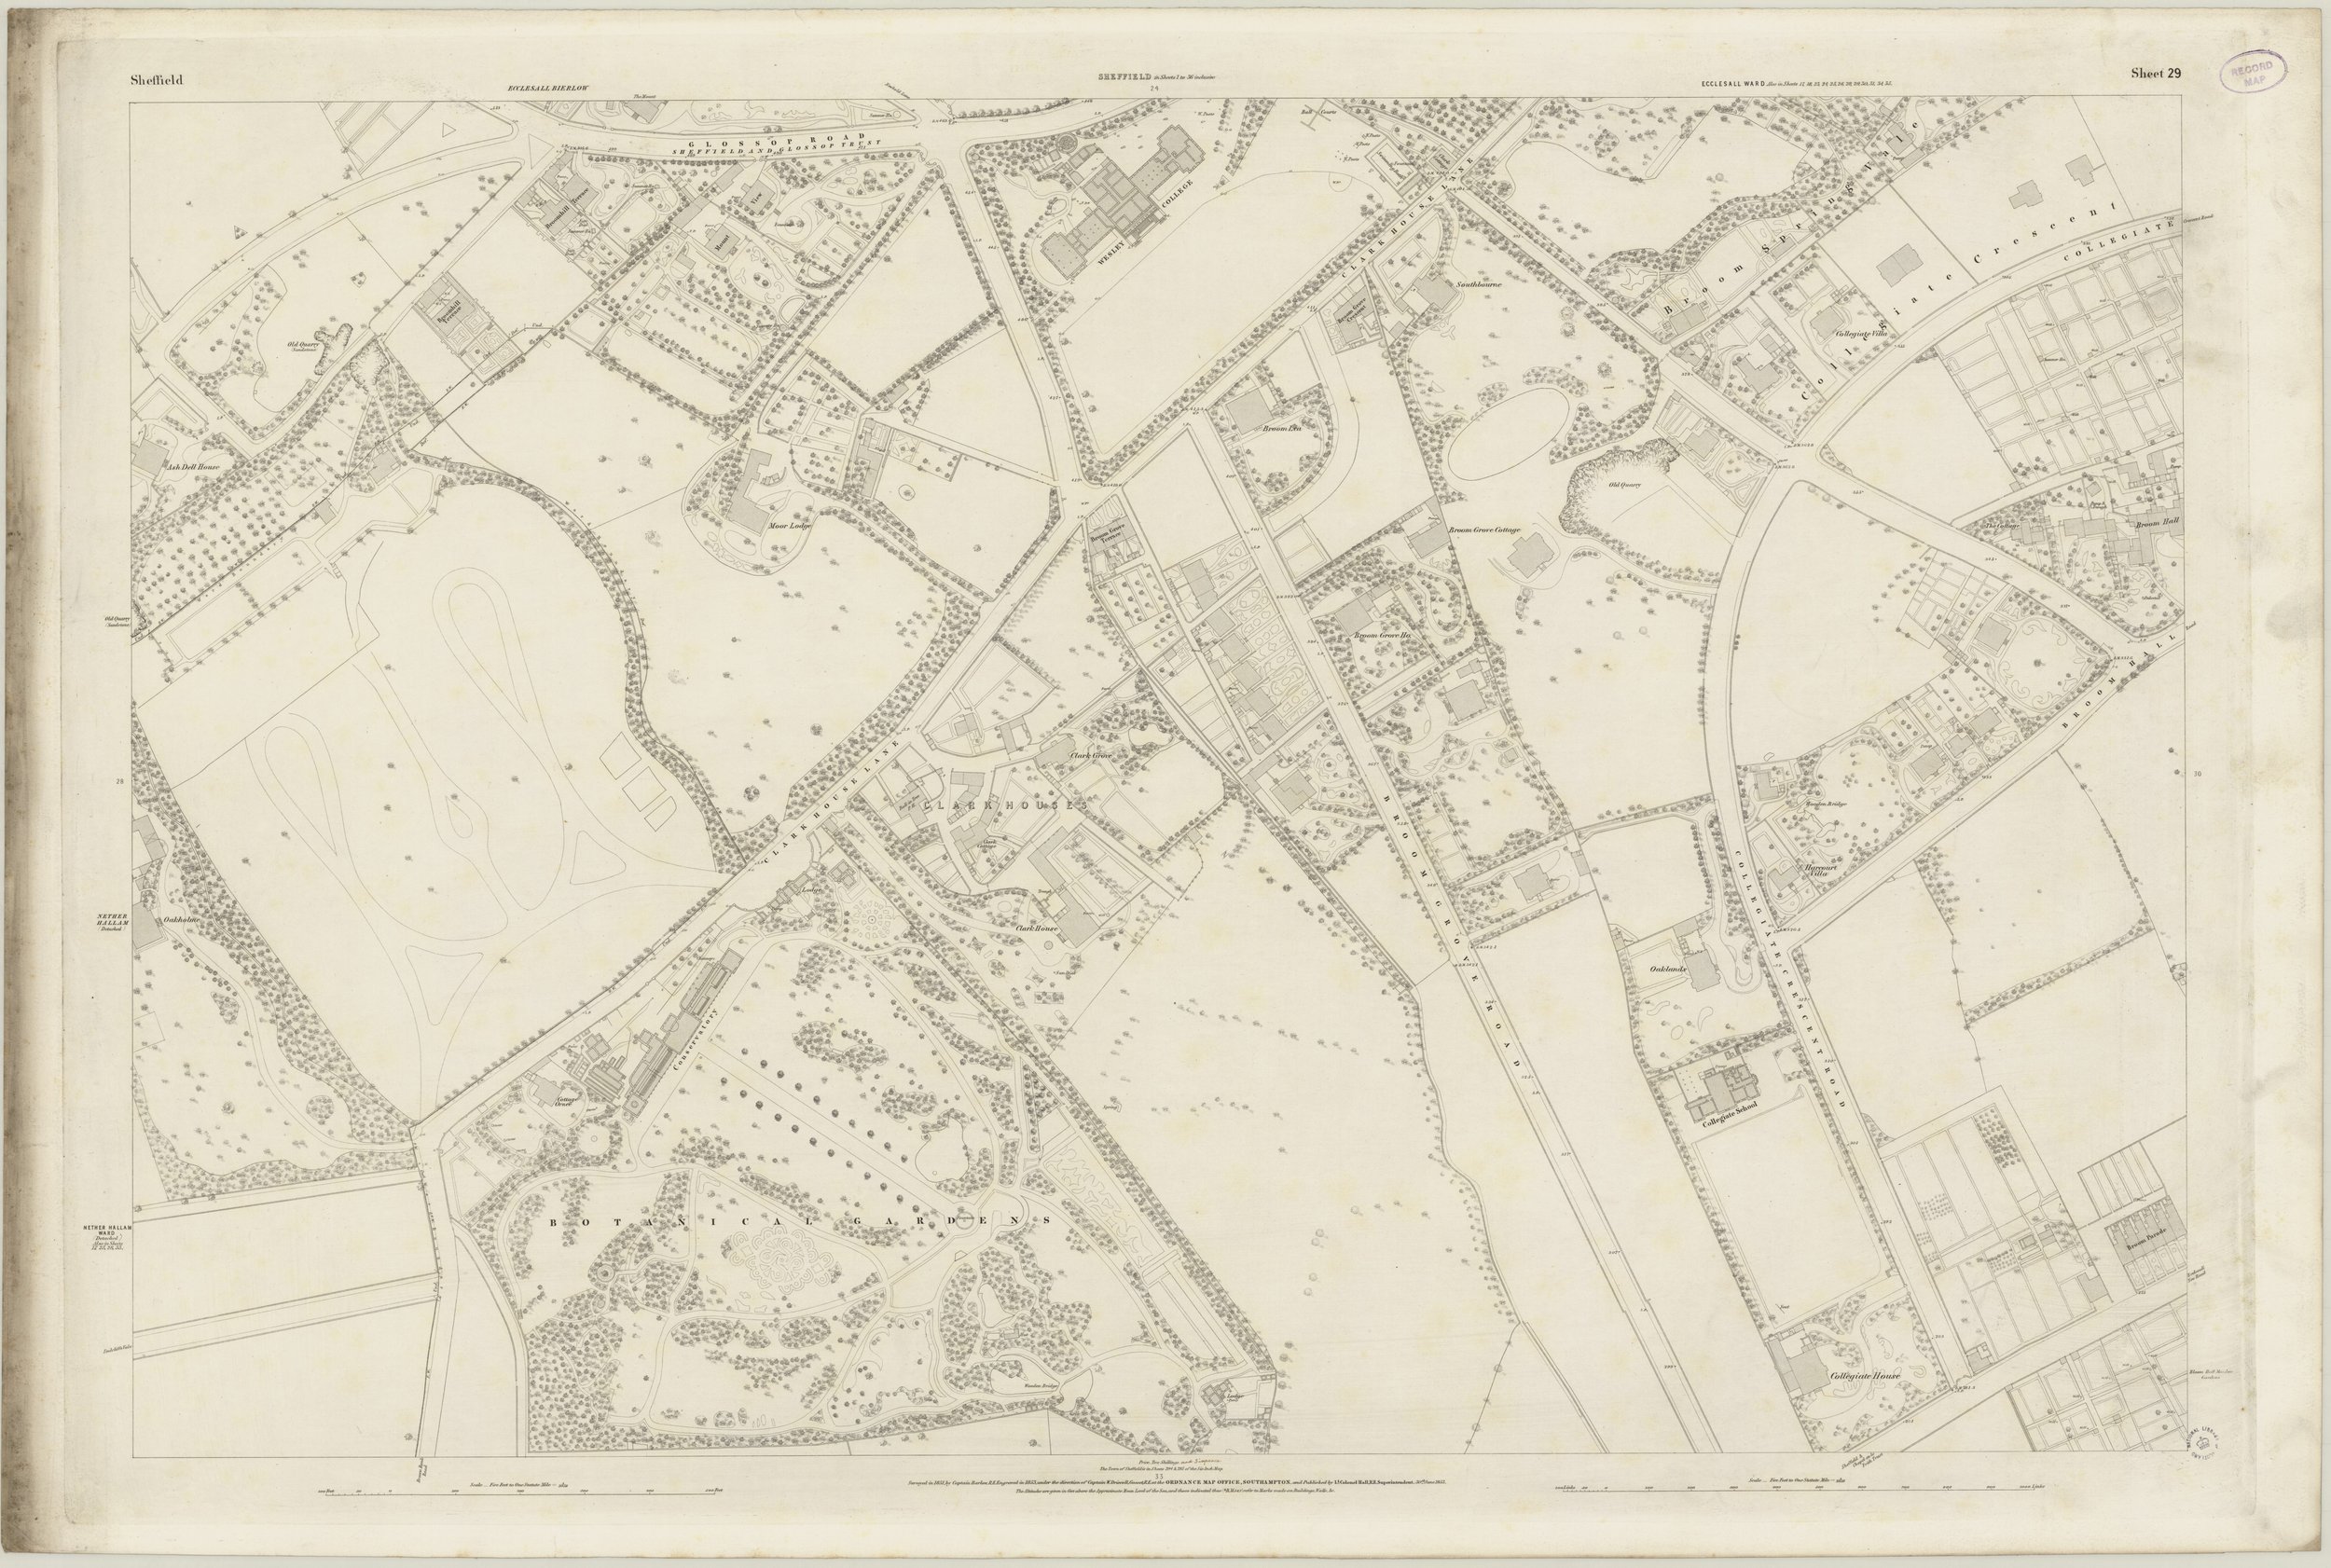 OS Map of Broomgrove Road and Surrounding Areas - 1853